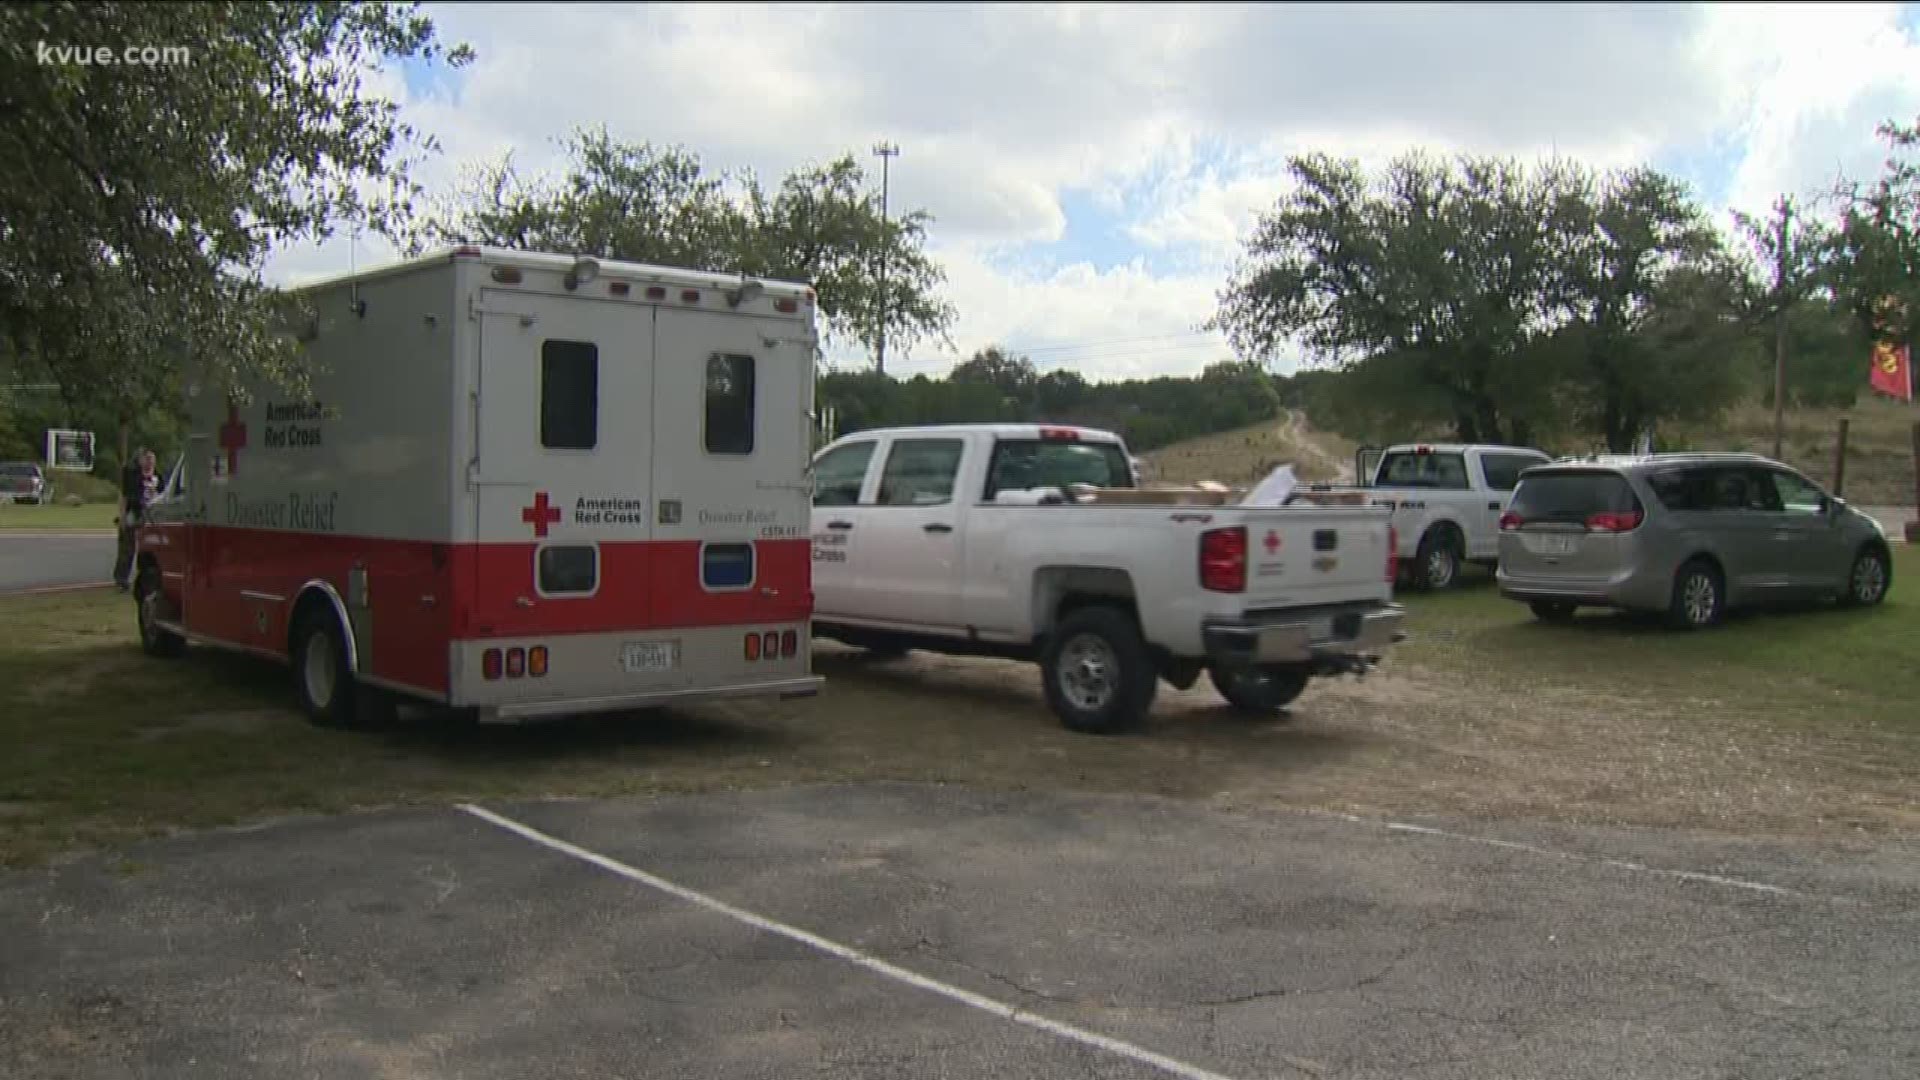 A new Red Cross center opened in Lago Vista to help those affected by recent flooding.